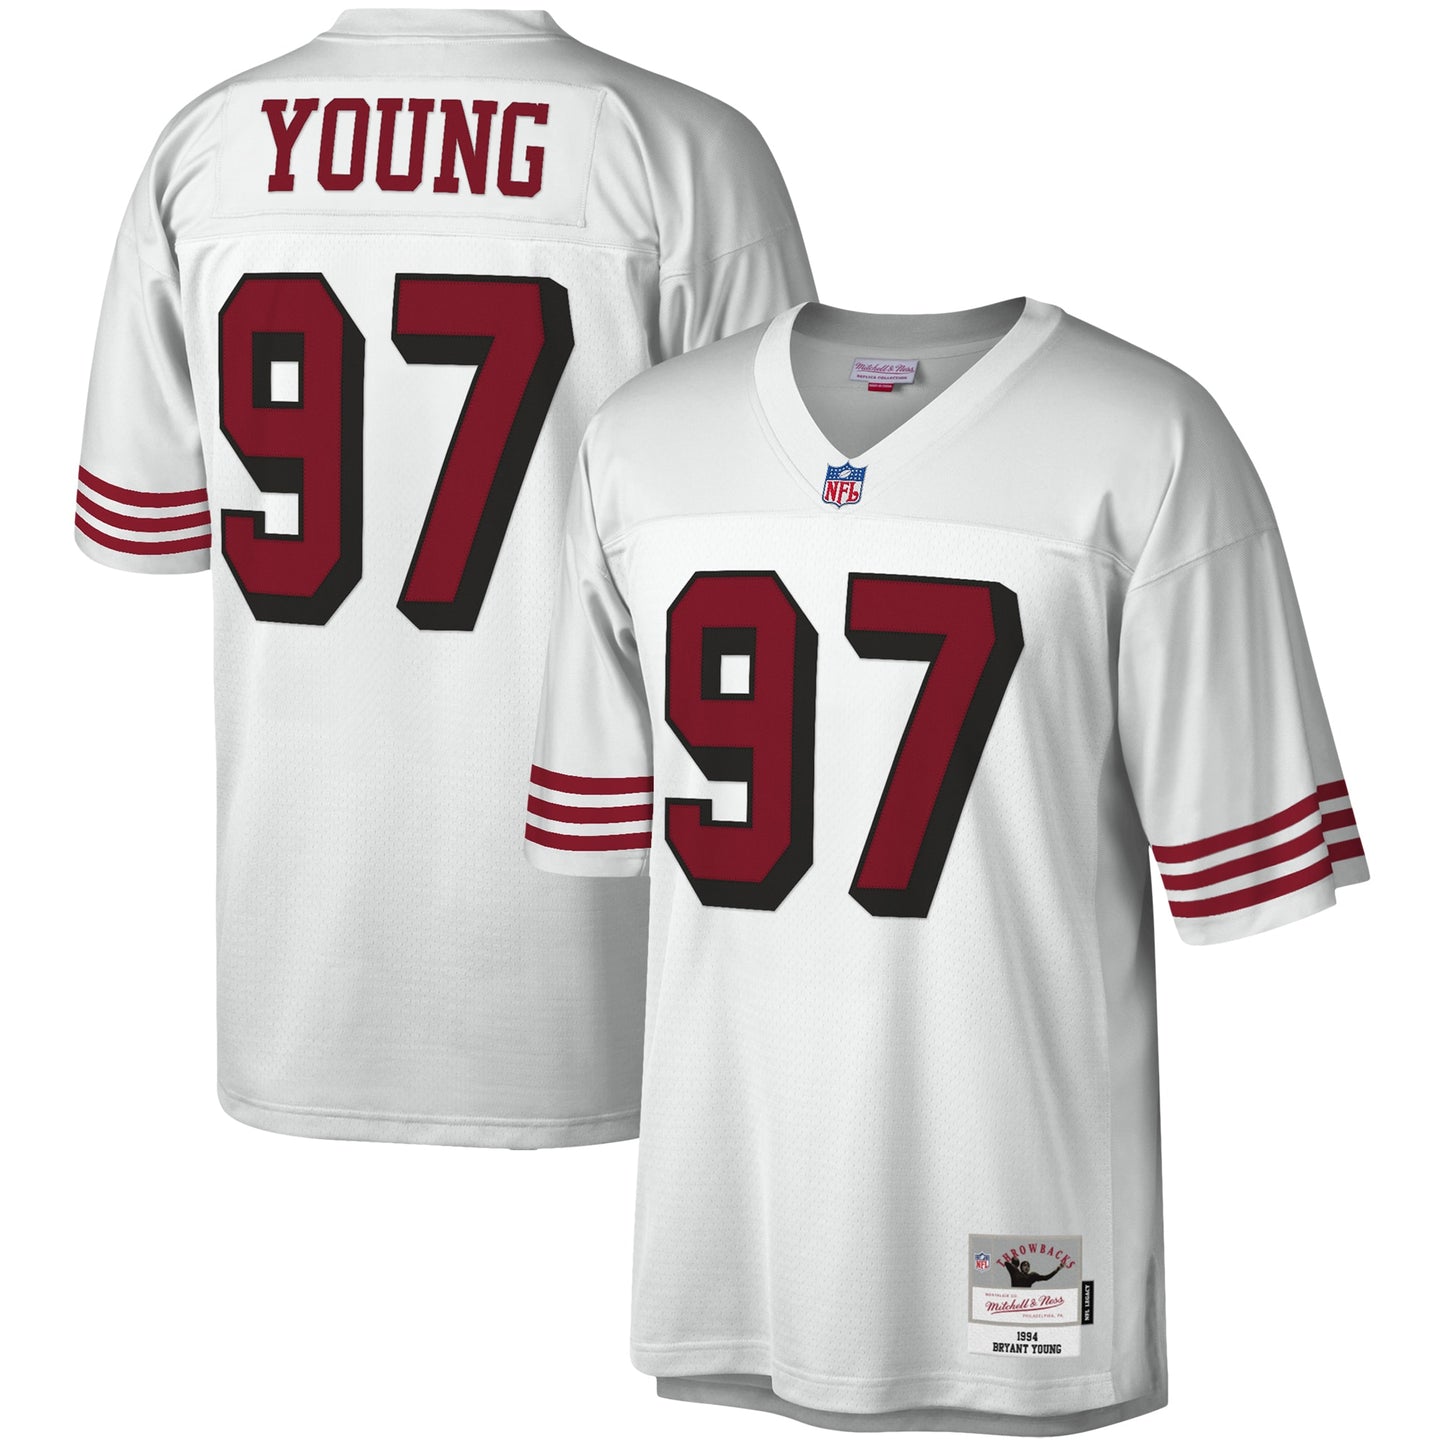 Bryant Young San Francisco 49ers Mitchell & Ness Legacy Replica Jersey - White